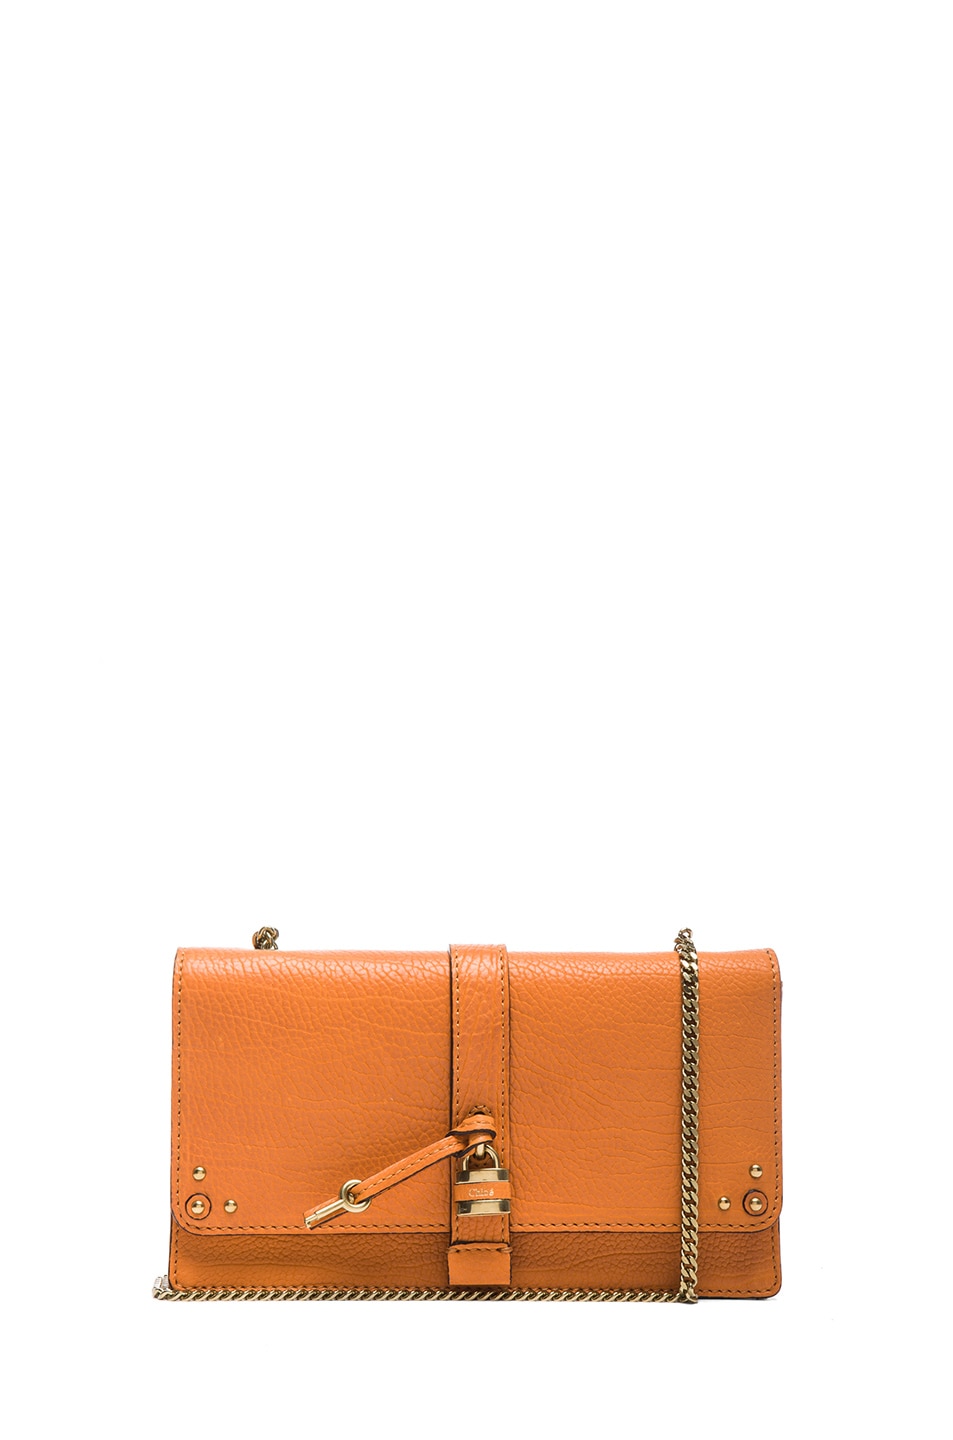 Chloe Aurore Wallet with Chain in Carrot Cake | FWRD